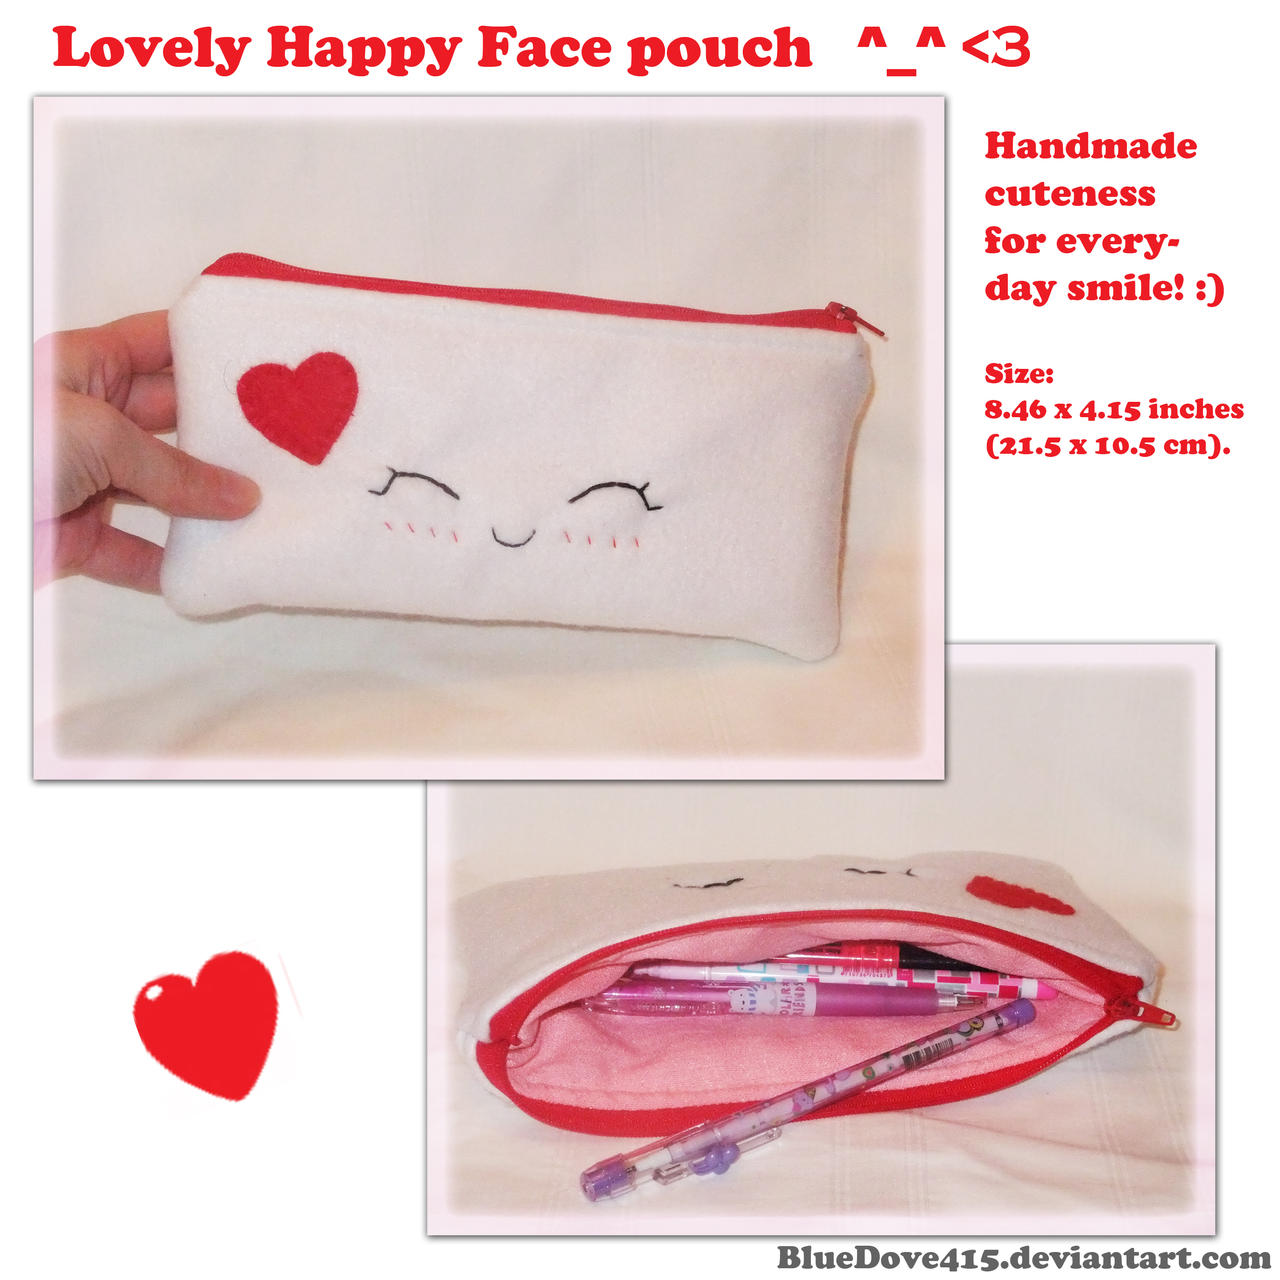 Lovely Happy Face pouch